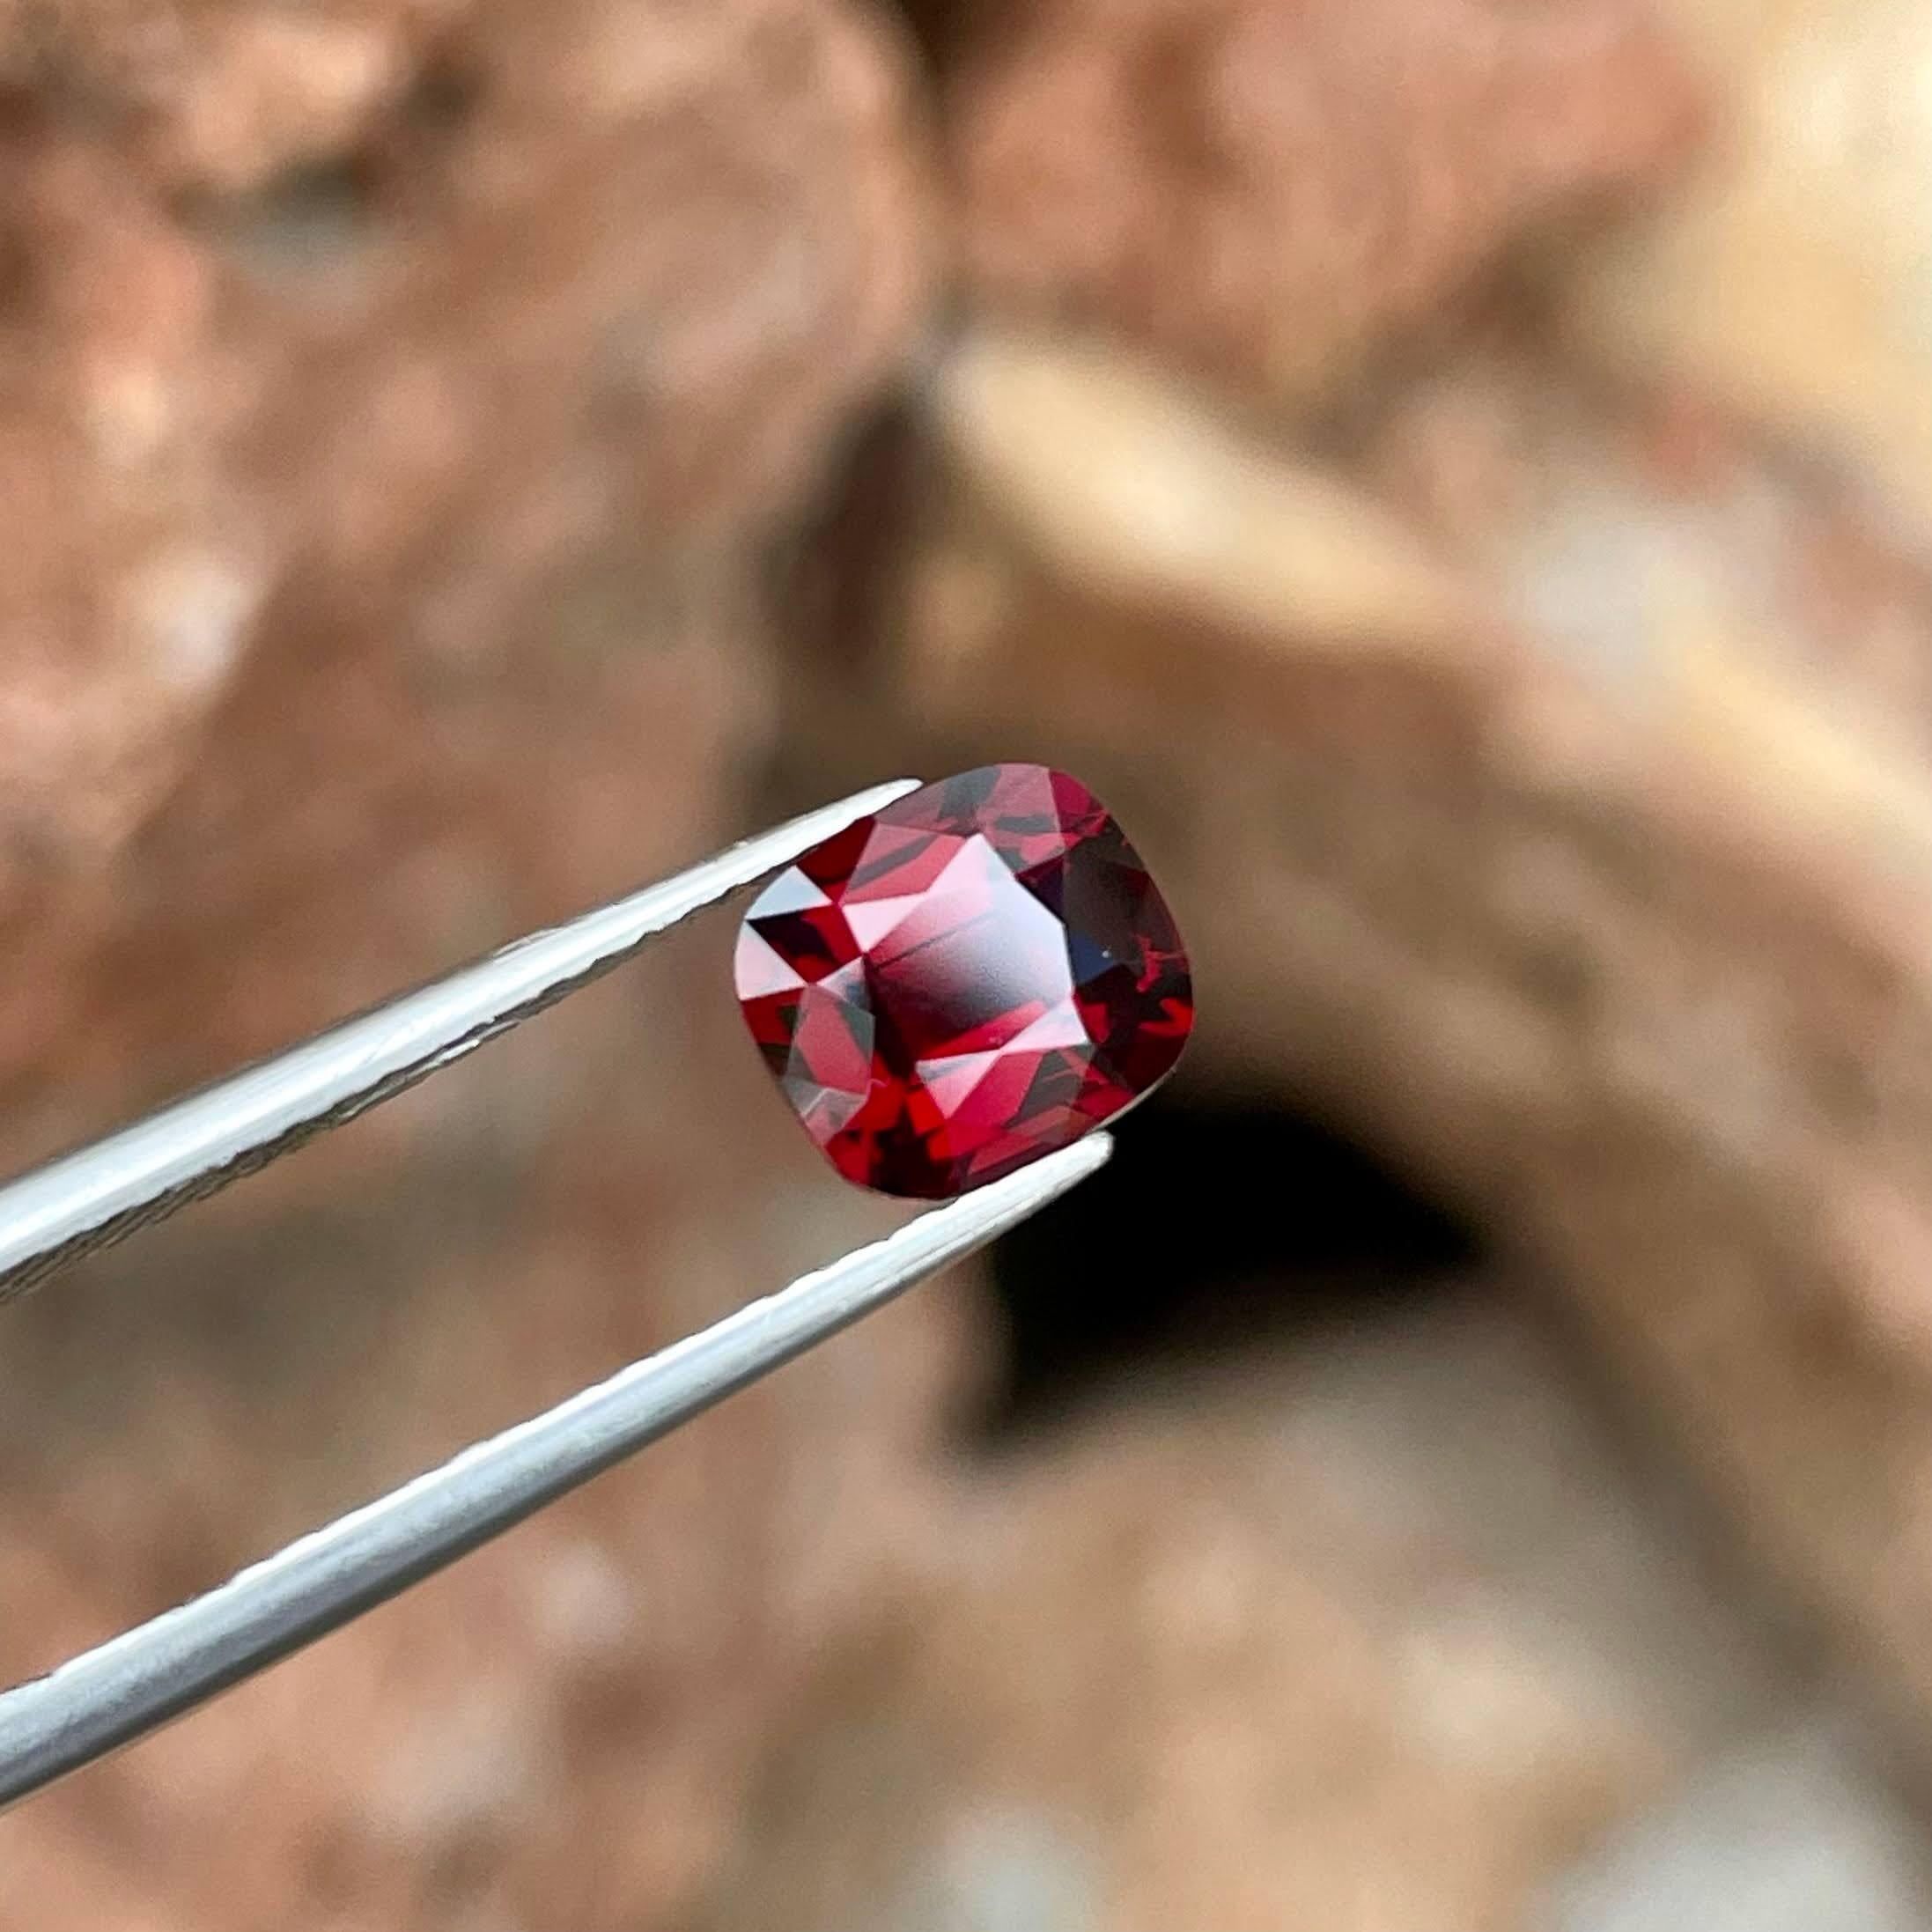 Weight 1.55 carats 
Dimensions 7.0x6.2x4.2 mm
Treatment none 
Origin Burma 
Clarity loupe clean 
Shape cushion
Cut fancy cushion 




Behold the allure of this exquisite 1.55 carats Natural Deep Red Burmese Spinel, a gemstone of unparalleled beauty